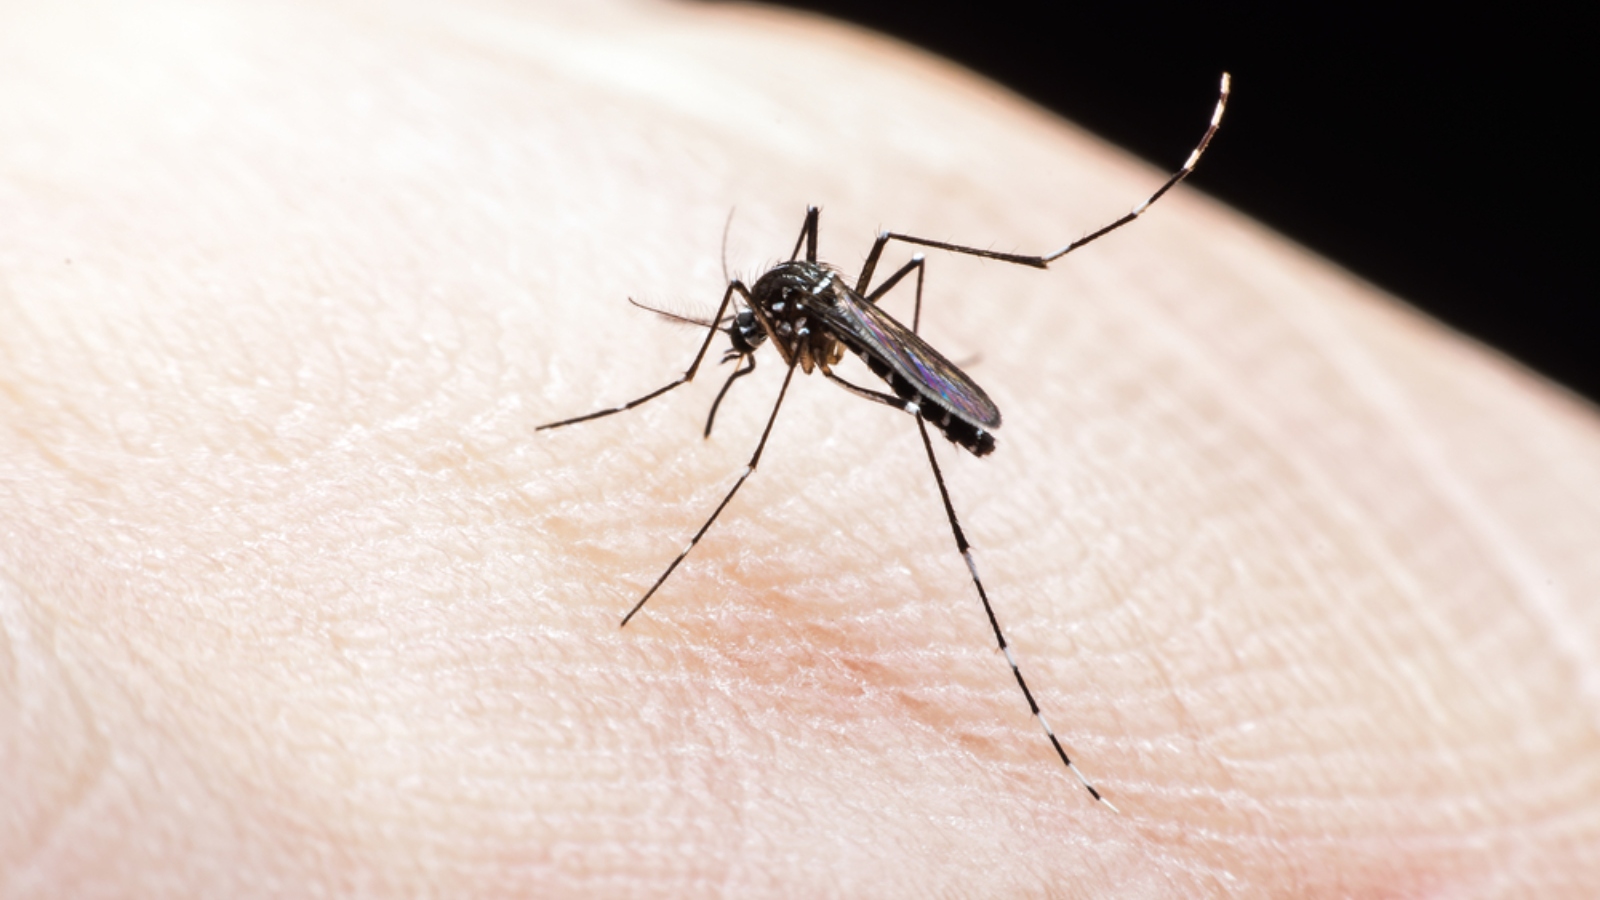 Israeli students find pesticide-free way to kill mosquitoes - ISRAEL21c